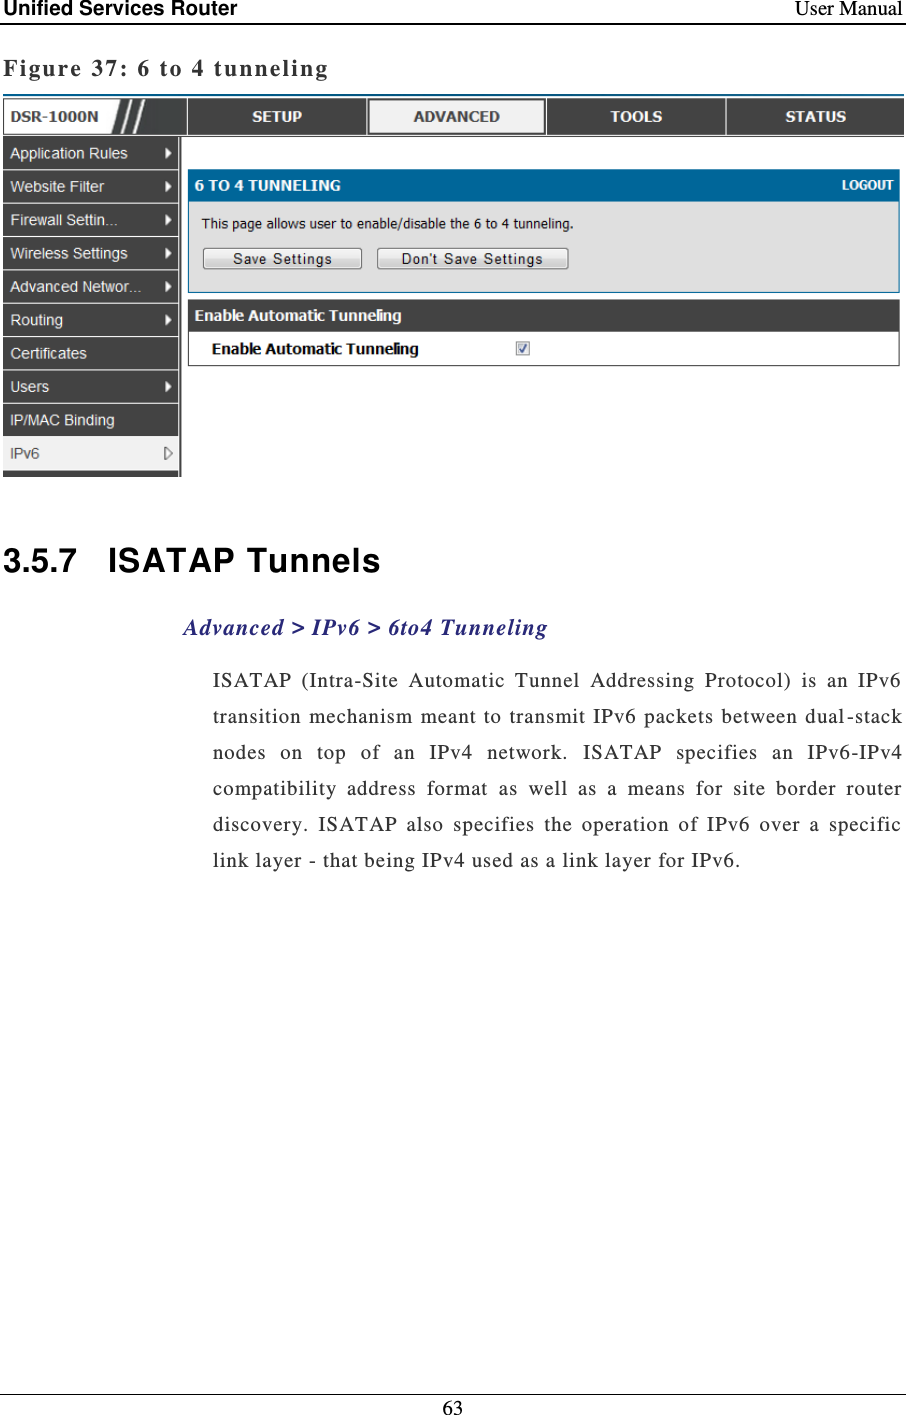 Unified Services Router    User Manual 63  Figure 37: 6  to 4 tunneling    3.5.7  ISATAP Tunnels Advanced &gt; IPv6 &gt; 6to4 Tunneling ISATAP  (Intra-Site  Automatic  Tunnel  Addressing  Protocol)  is  an  IPv6 transition  mechanism  meant to  transmit IPv6  packets between dual -stack nodes  on  top  of  an  IPv4  network.  ISATAP  specifies  an  IPv6-IPv4 compatibility  address  format  as  well  as  a  means  for  site  border  router discovery.  ISATAP  also  specifies  the  operation  of  IPv6  over  a  specific link layer - that being IPv4 used as a link layer for IPv6. 